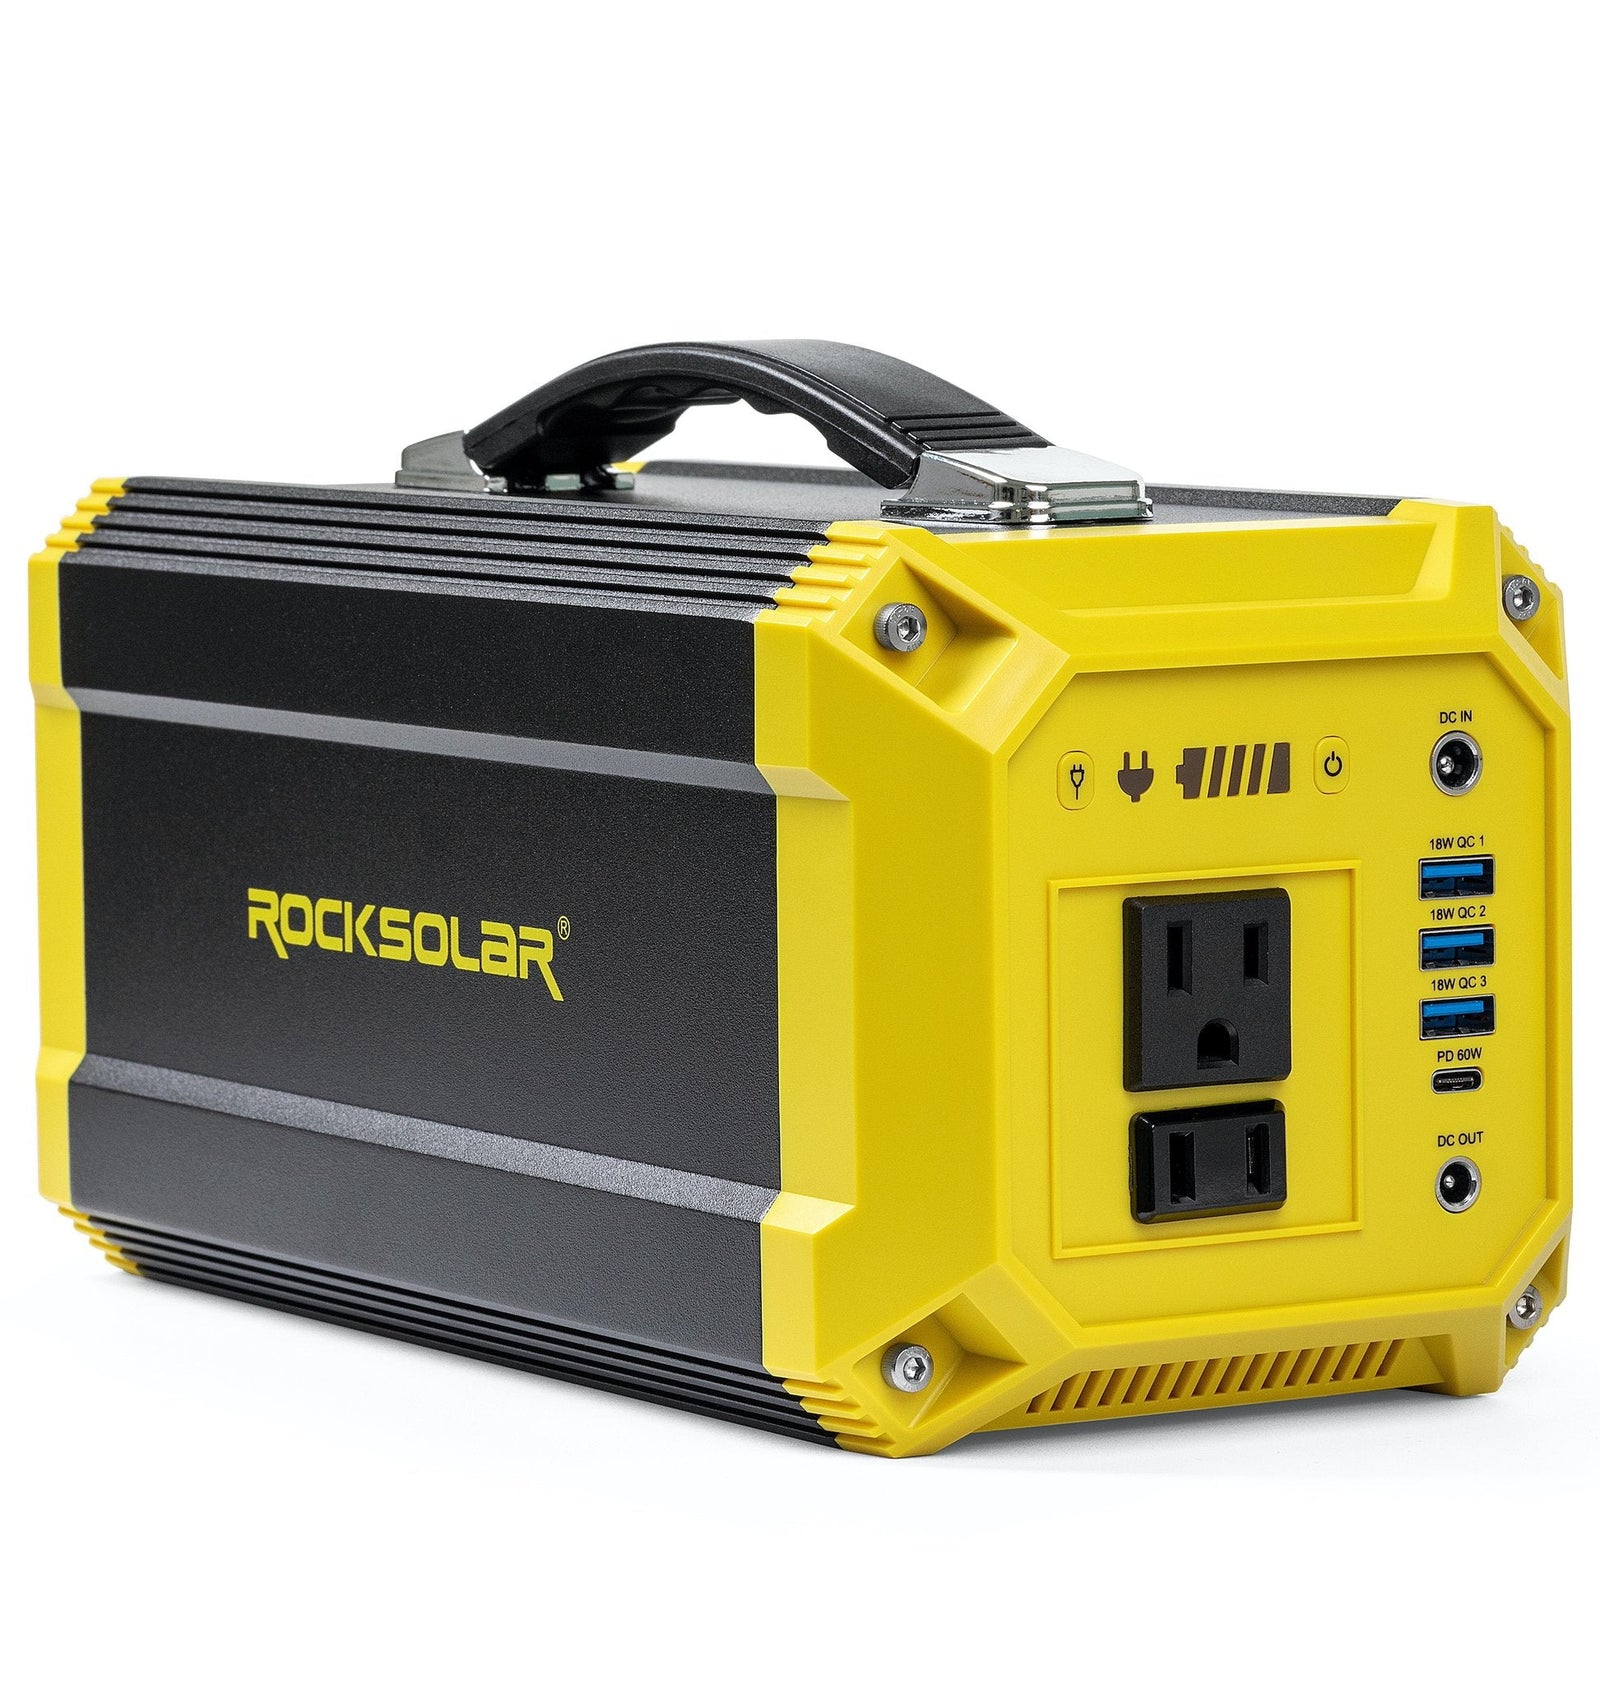 Your Guide To Choosing The Best Portable Power Station